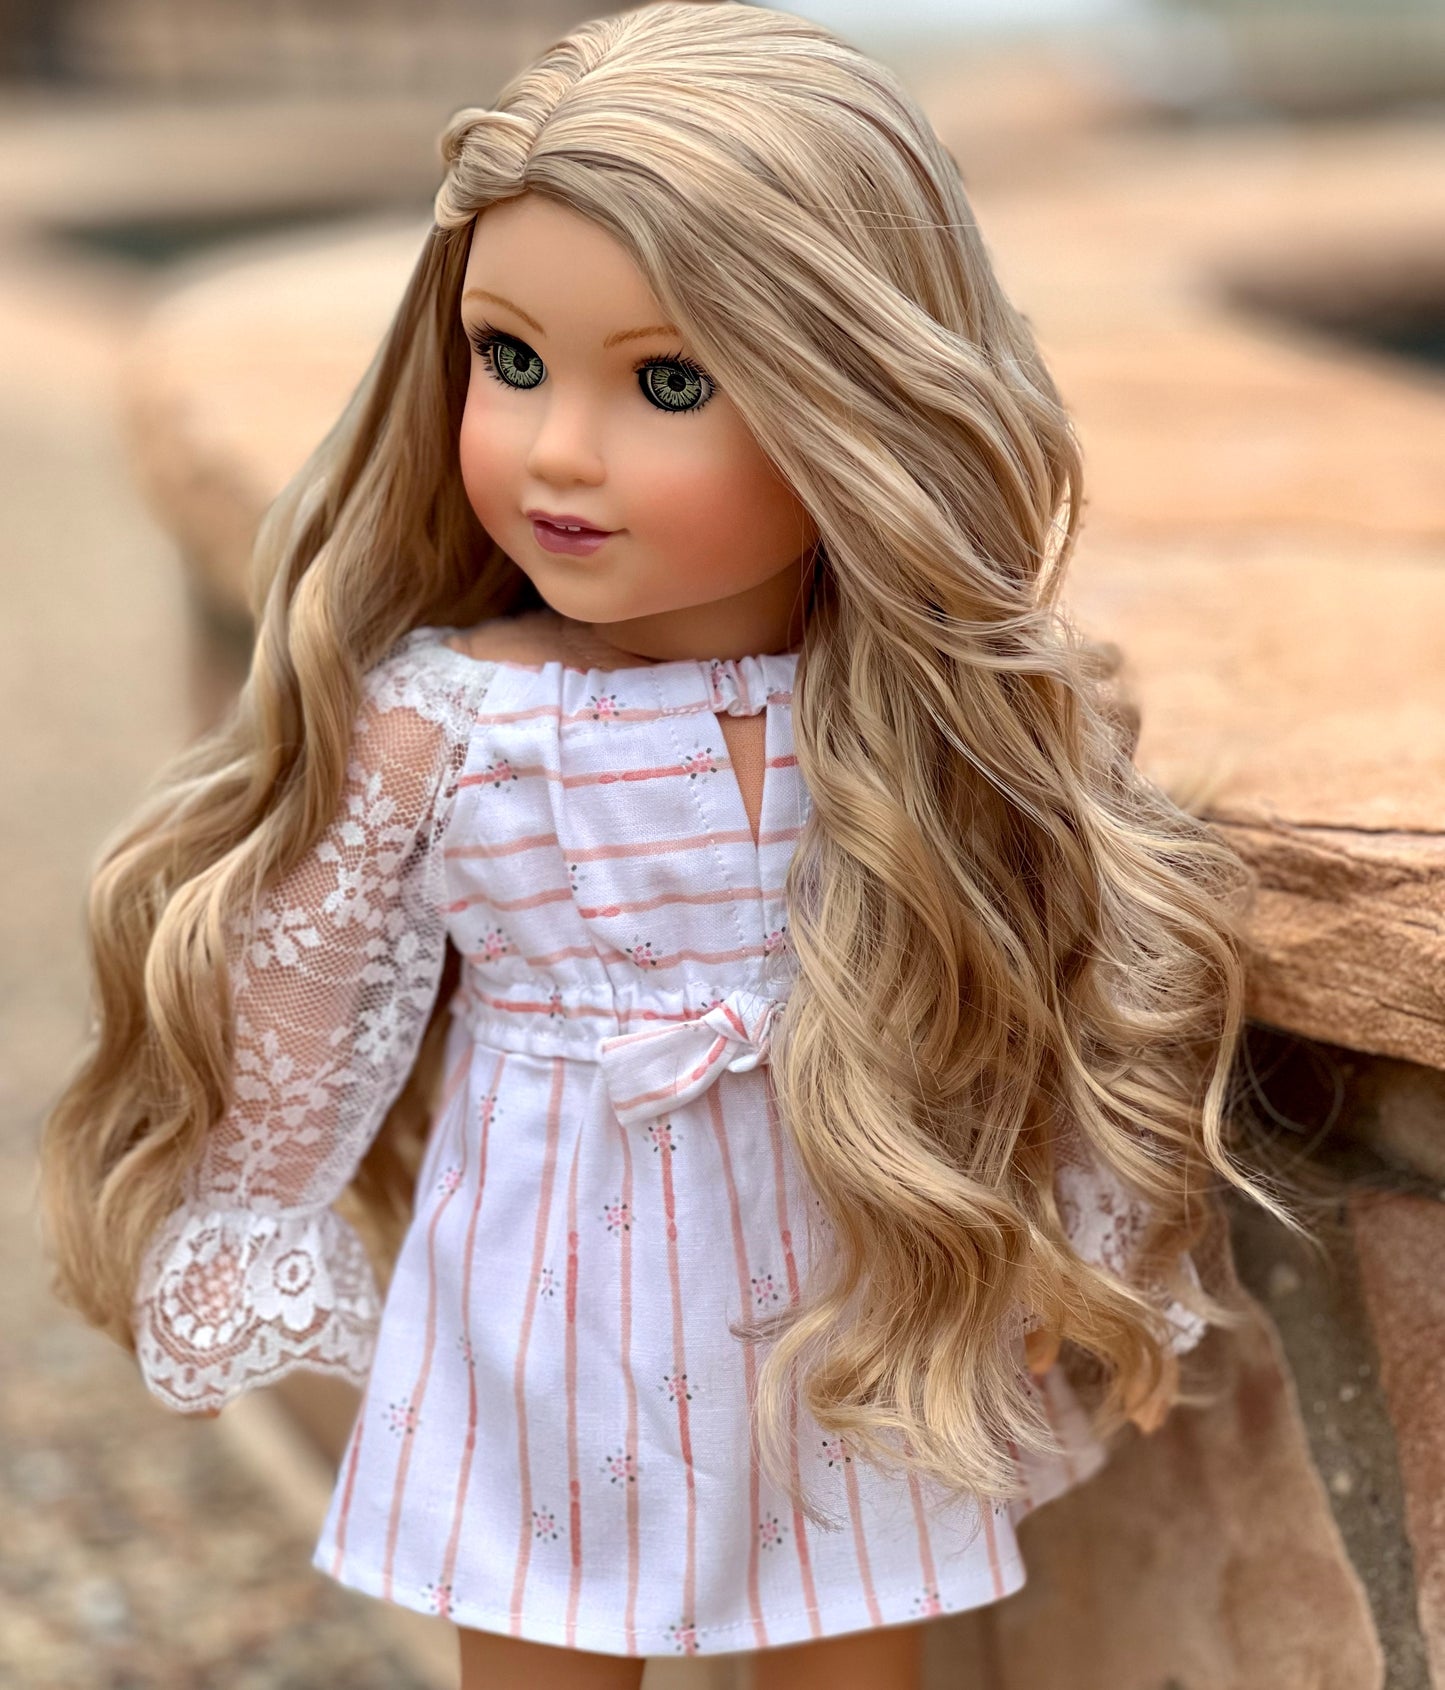 American Girl Doll Wig “Cafe Latte” Long wavy highlights